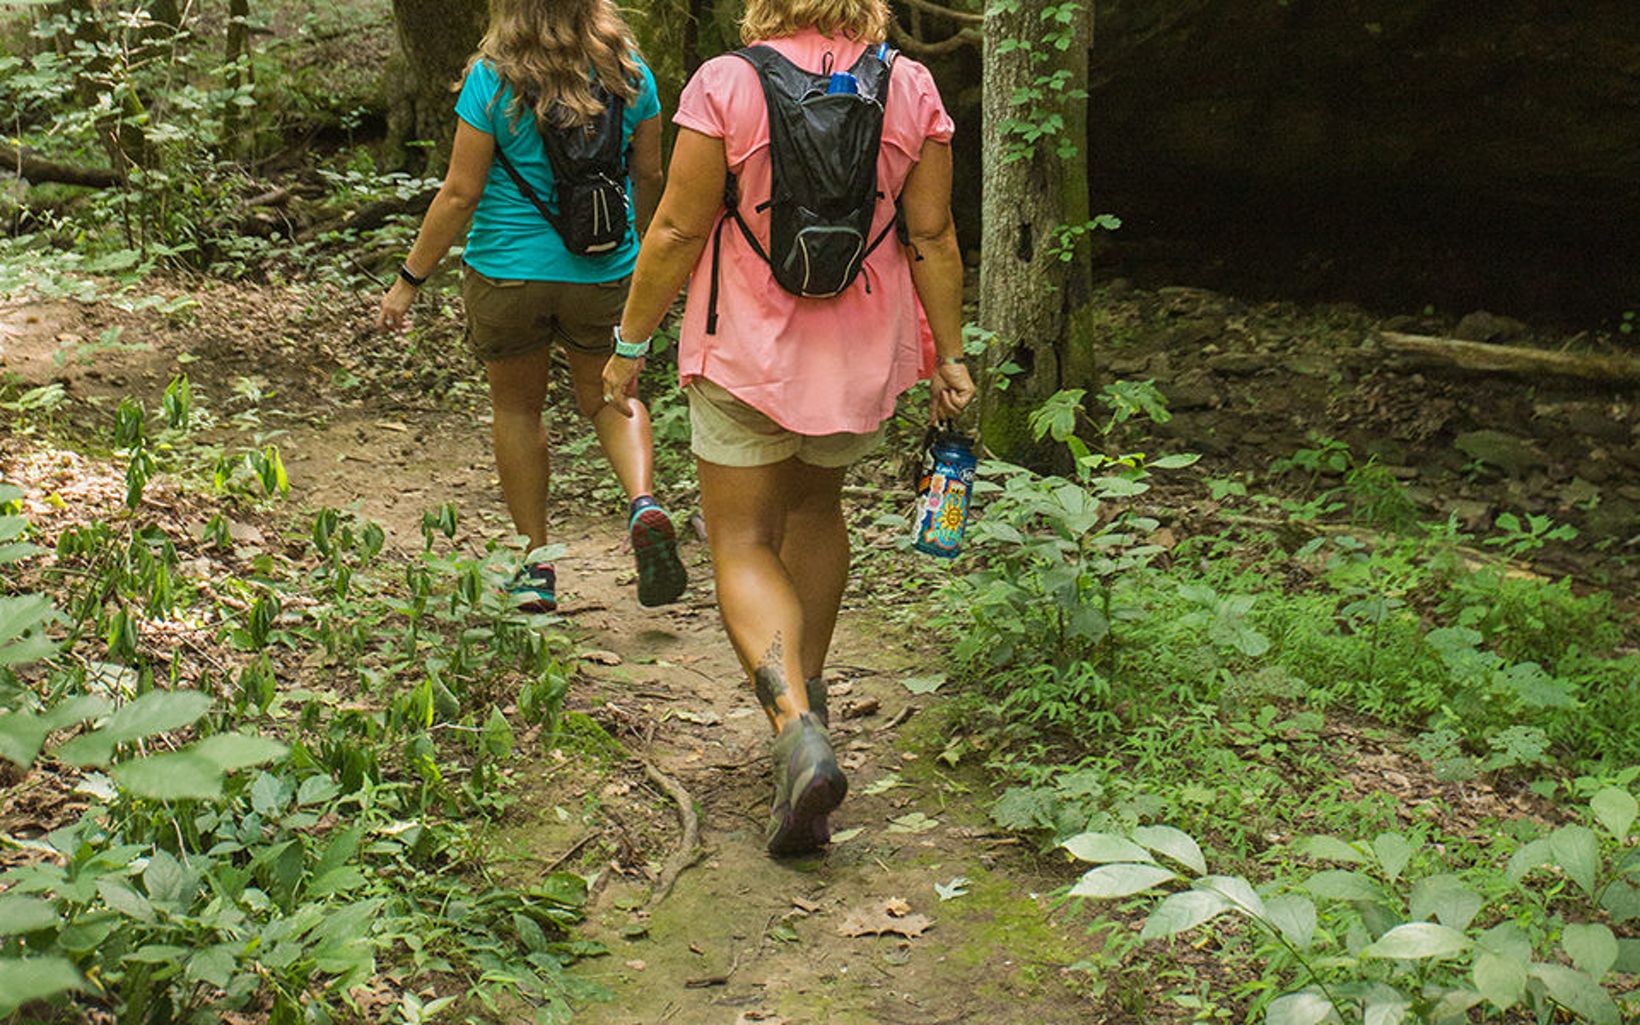 Hiking Two hikers enjoy the trail at Mantle Rock Nature Preserve. © Mike Wilkinson